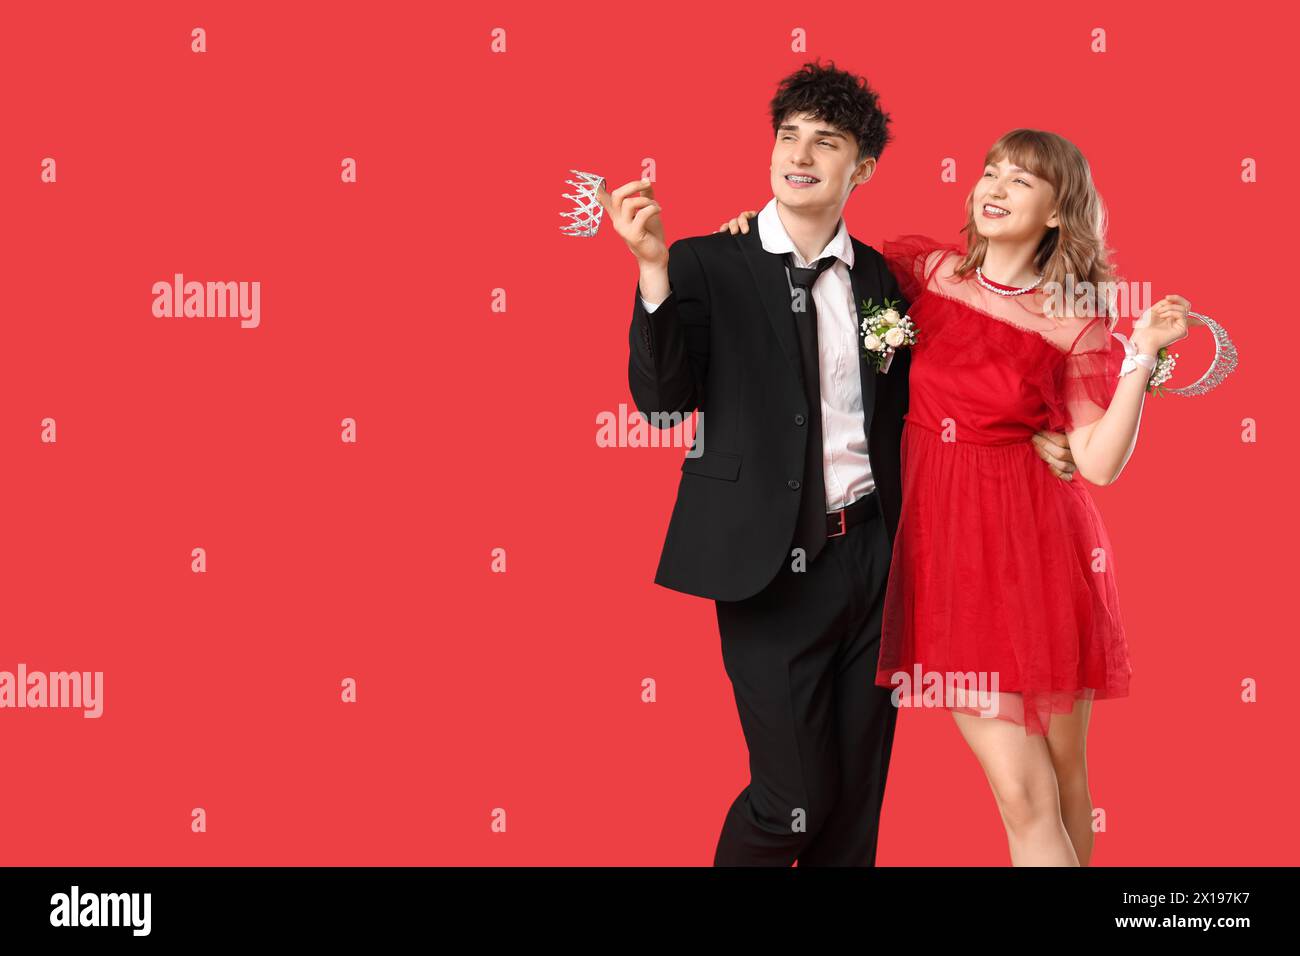 Happy prom couple holding crowns on red background Stock Photo